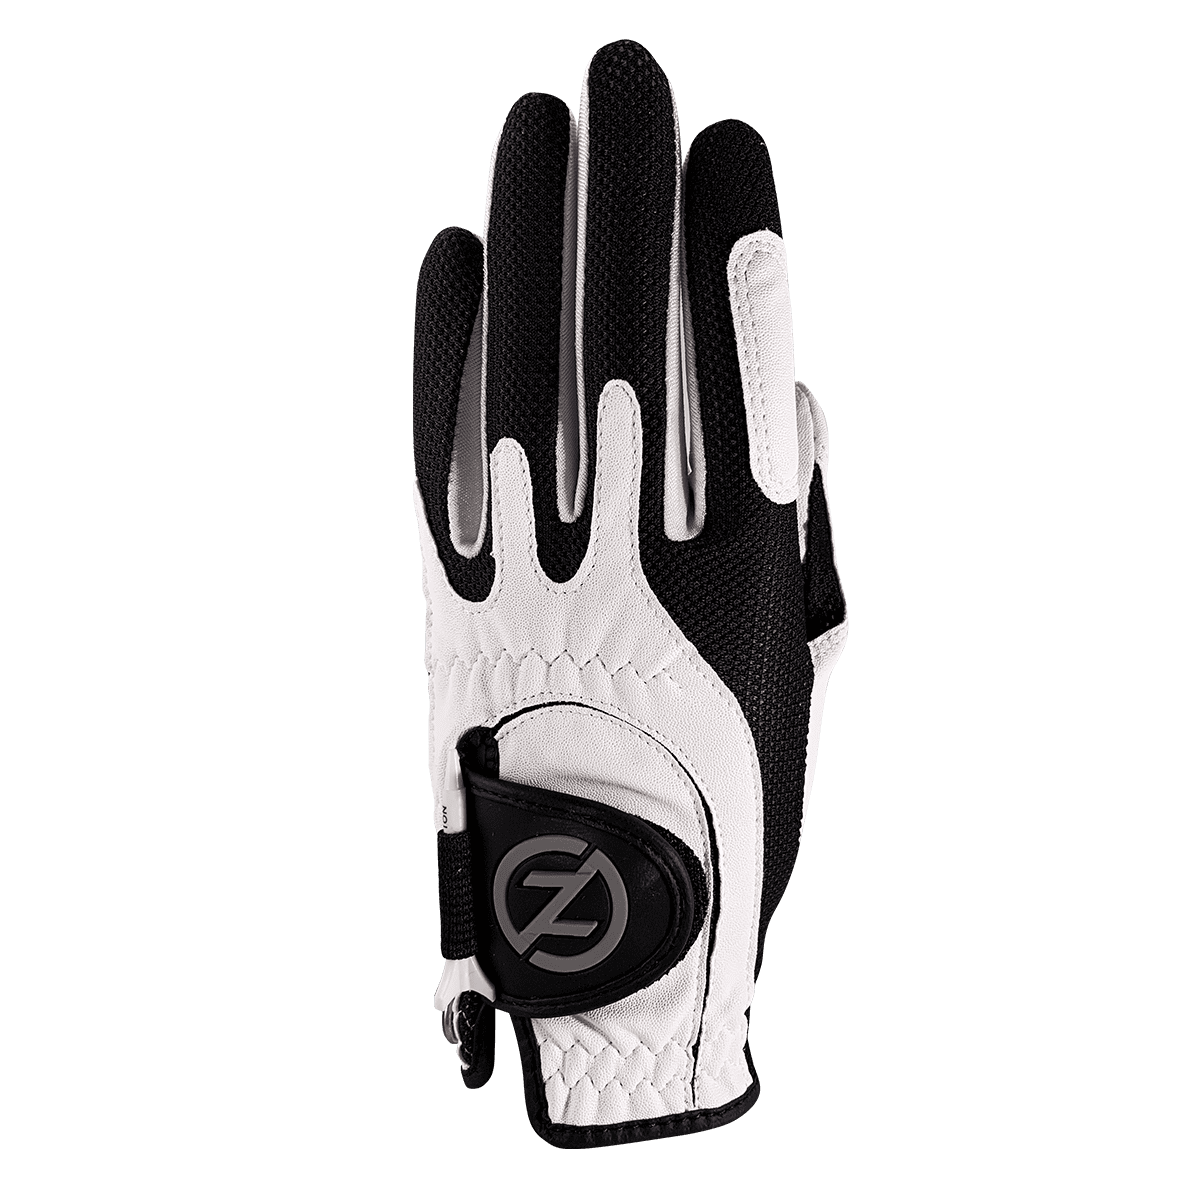 Zero Friction Junior Performance Synthetic White Golf Glove (Left Hand, One Size) $4.34 + Free S&H w/ Walmart+ or $35+